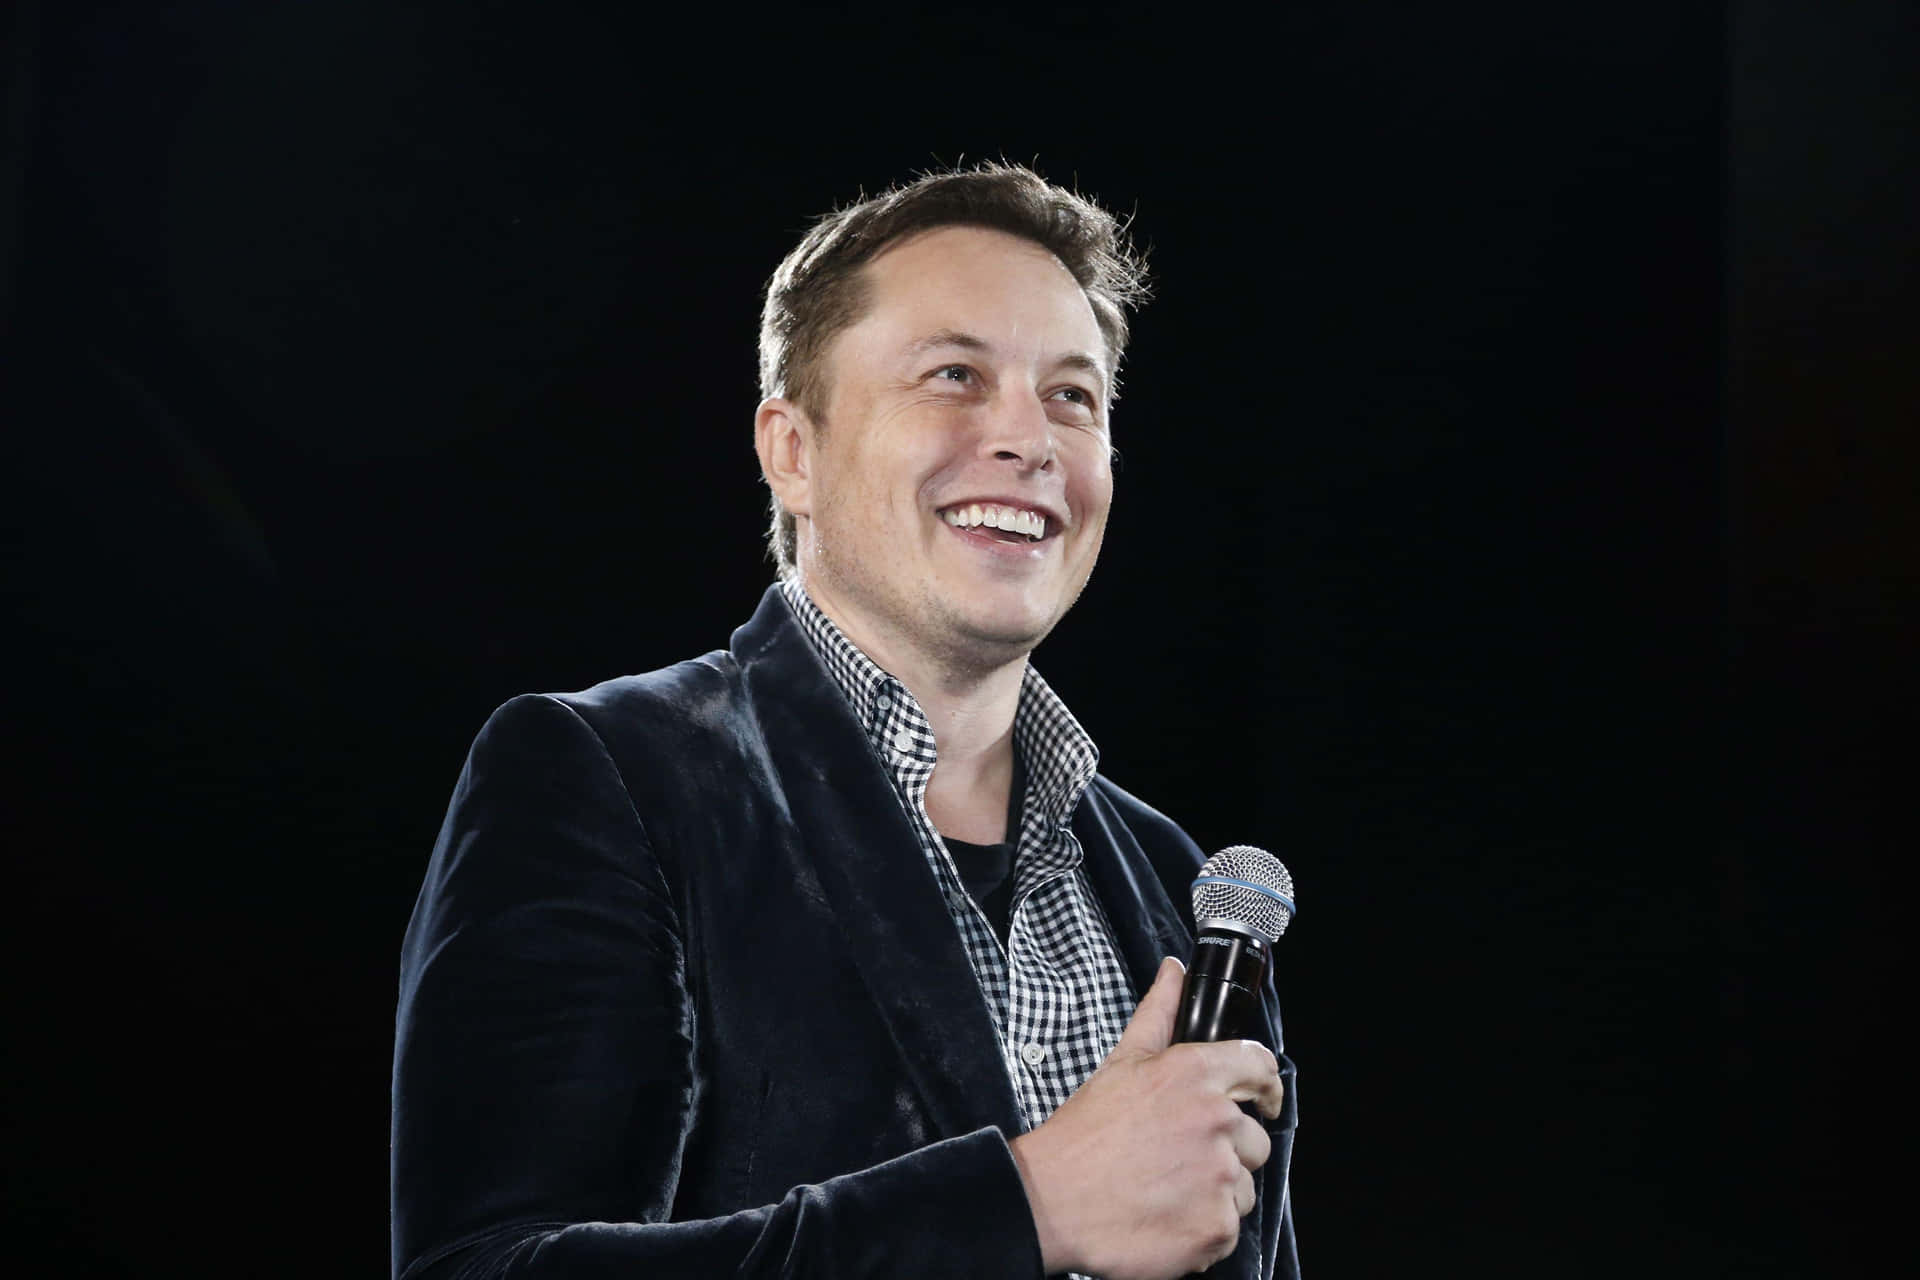 CEO of Tesla, Inc and SpaceX, Elon Musk.